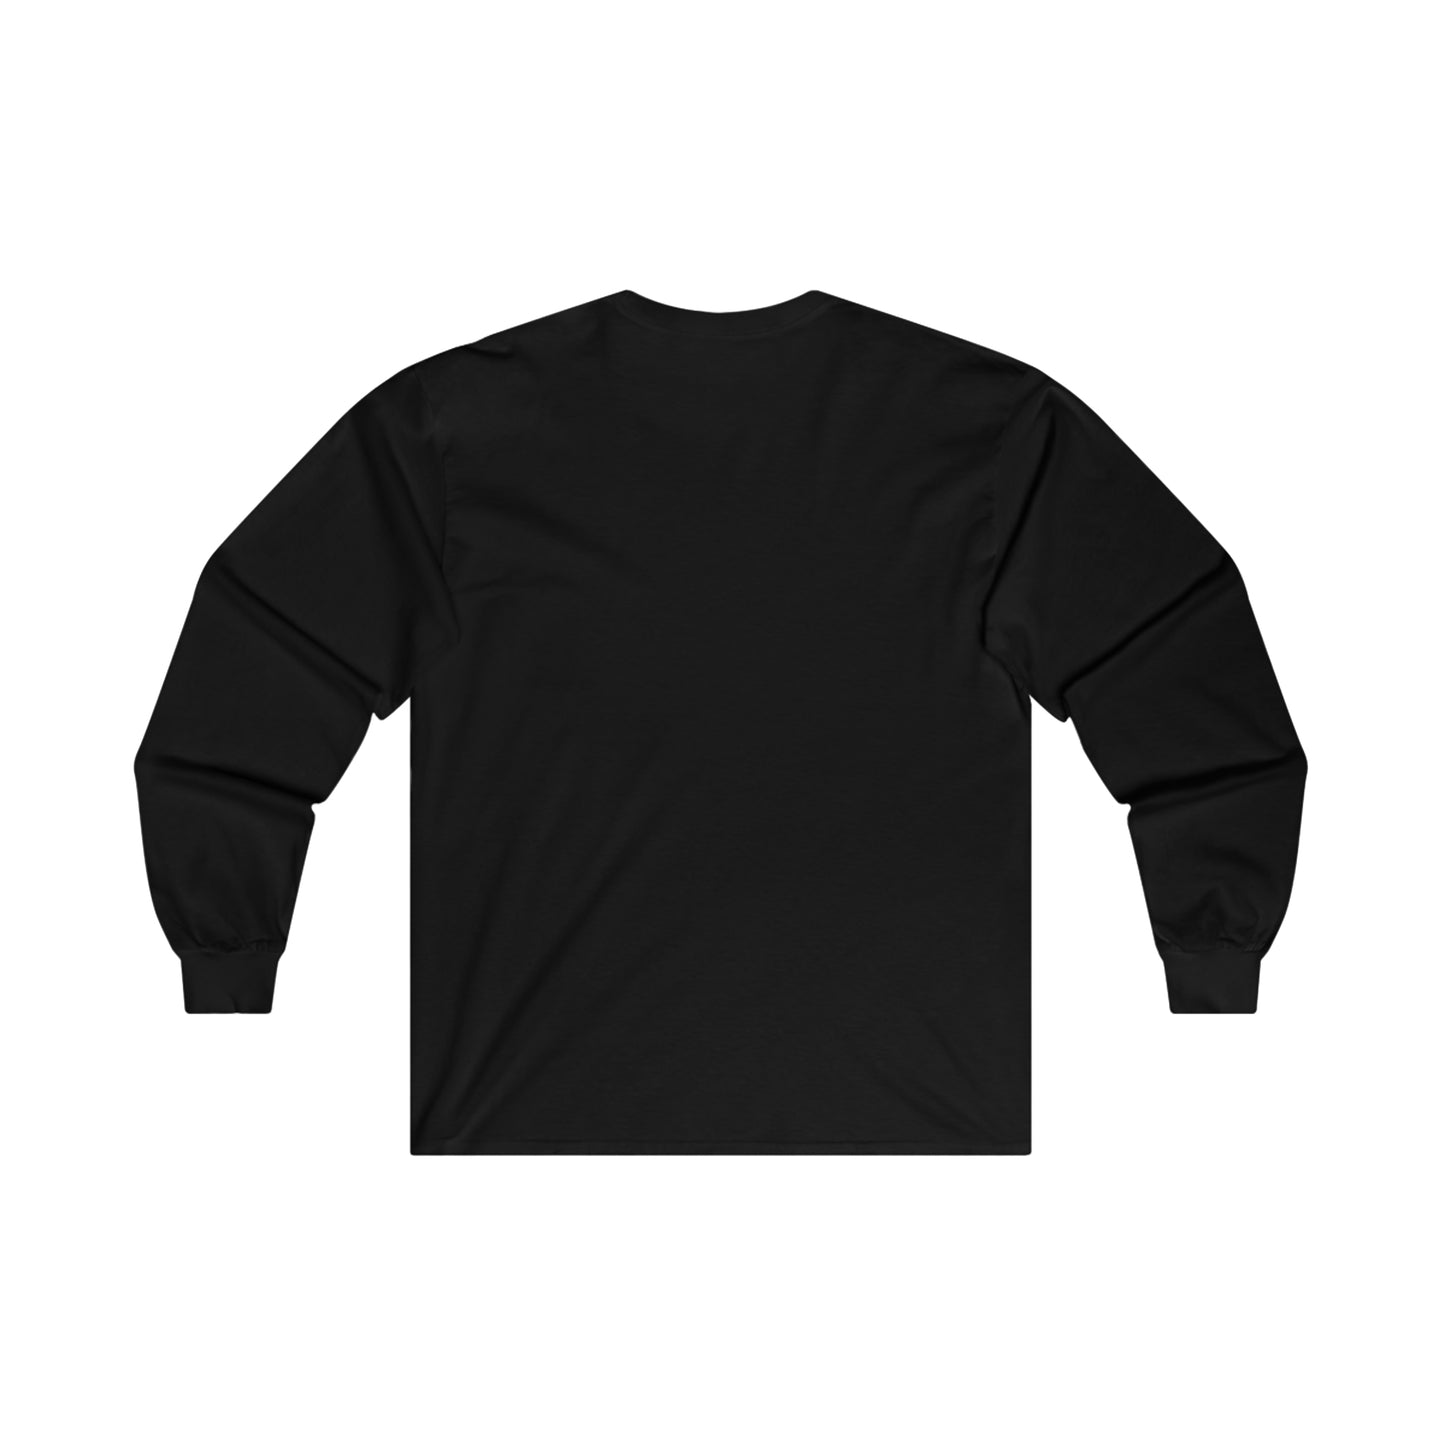 Gods Hand Passing Beer - Ultra Cotton Long Sleeve Tee